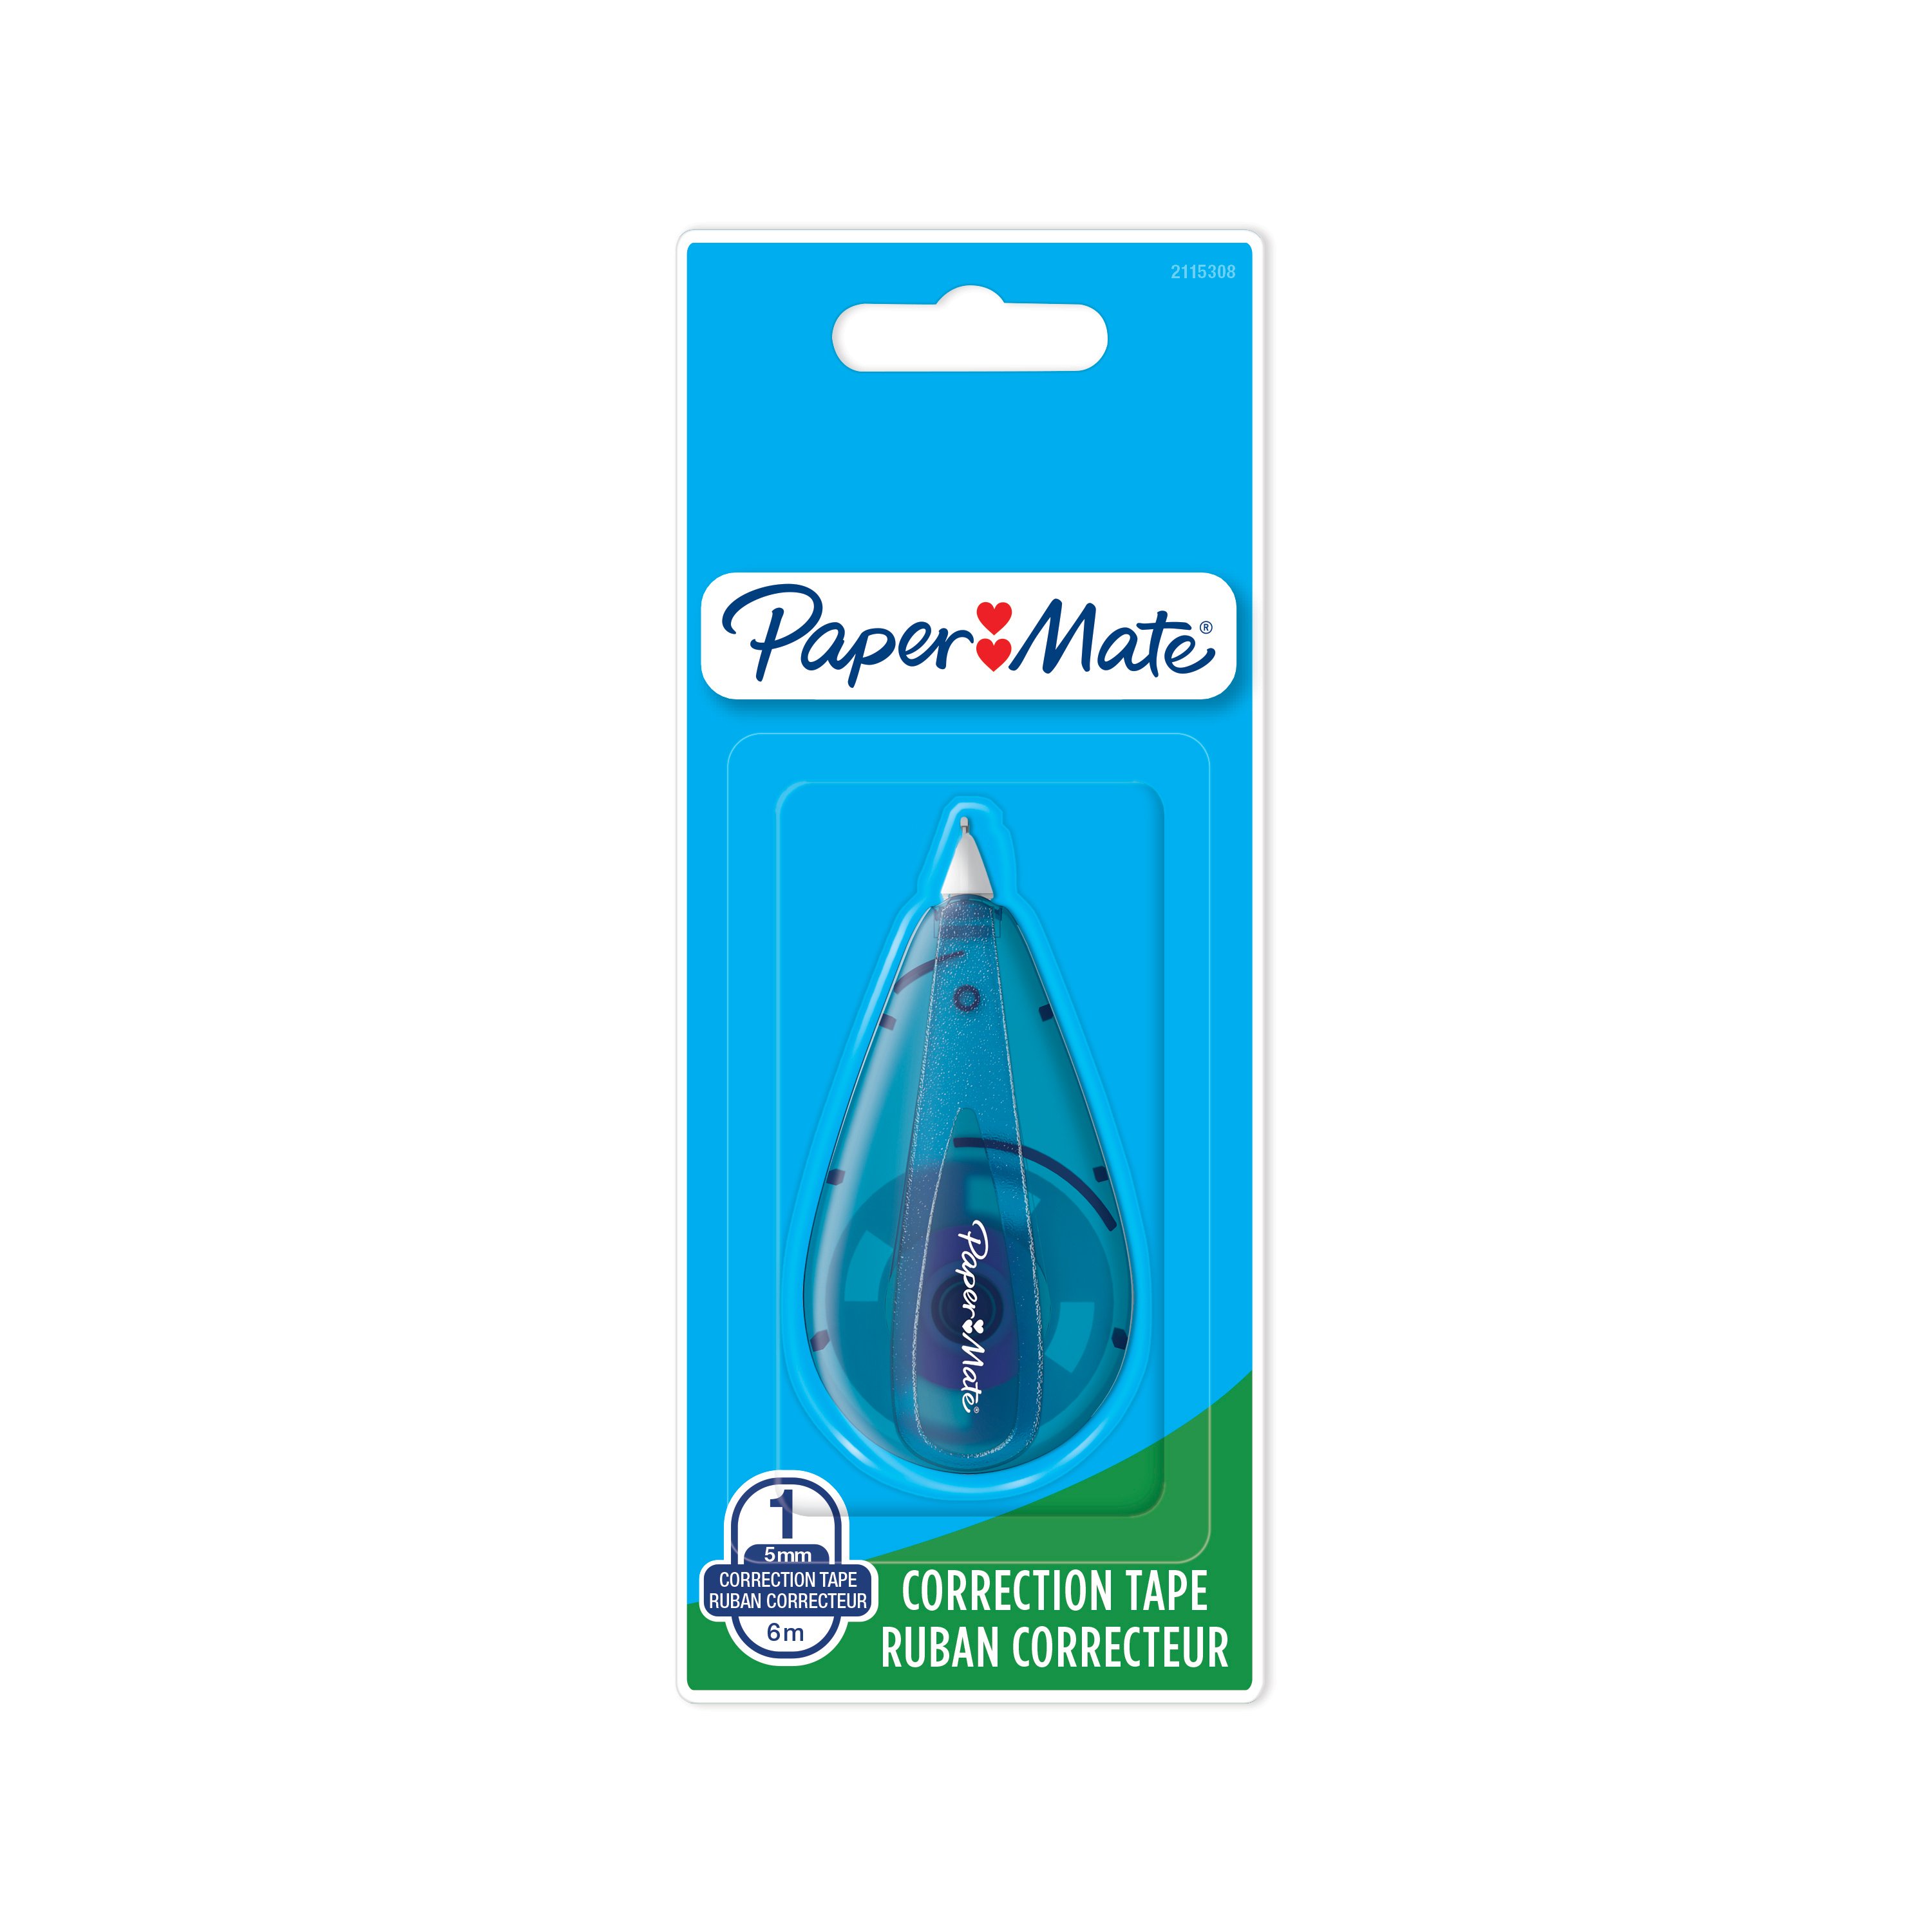 Papermate Correction Tape 5 Mm - 1 ea